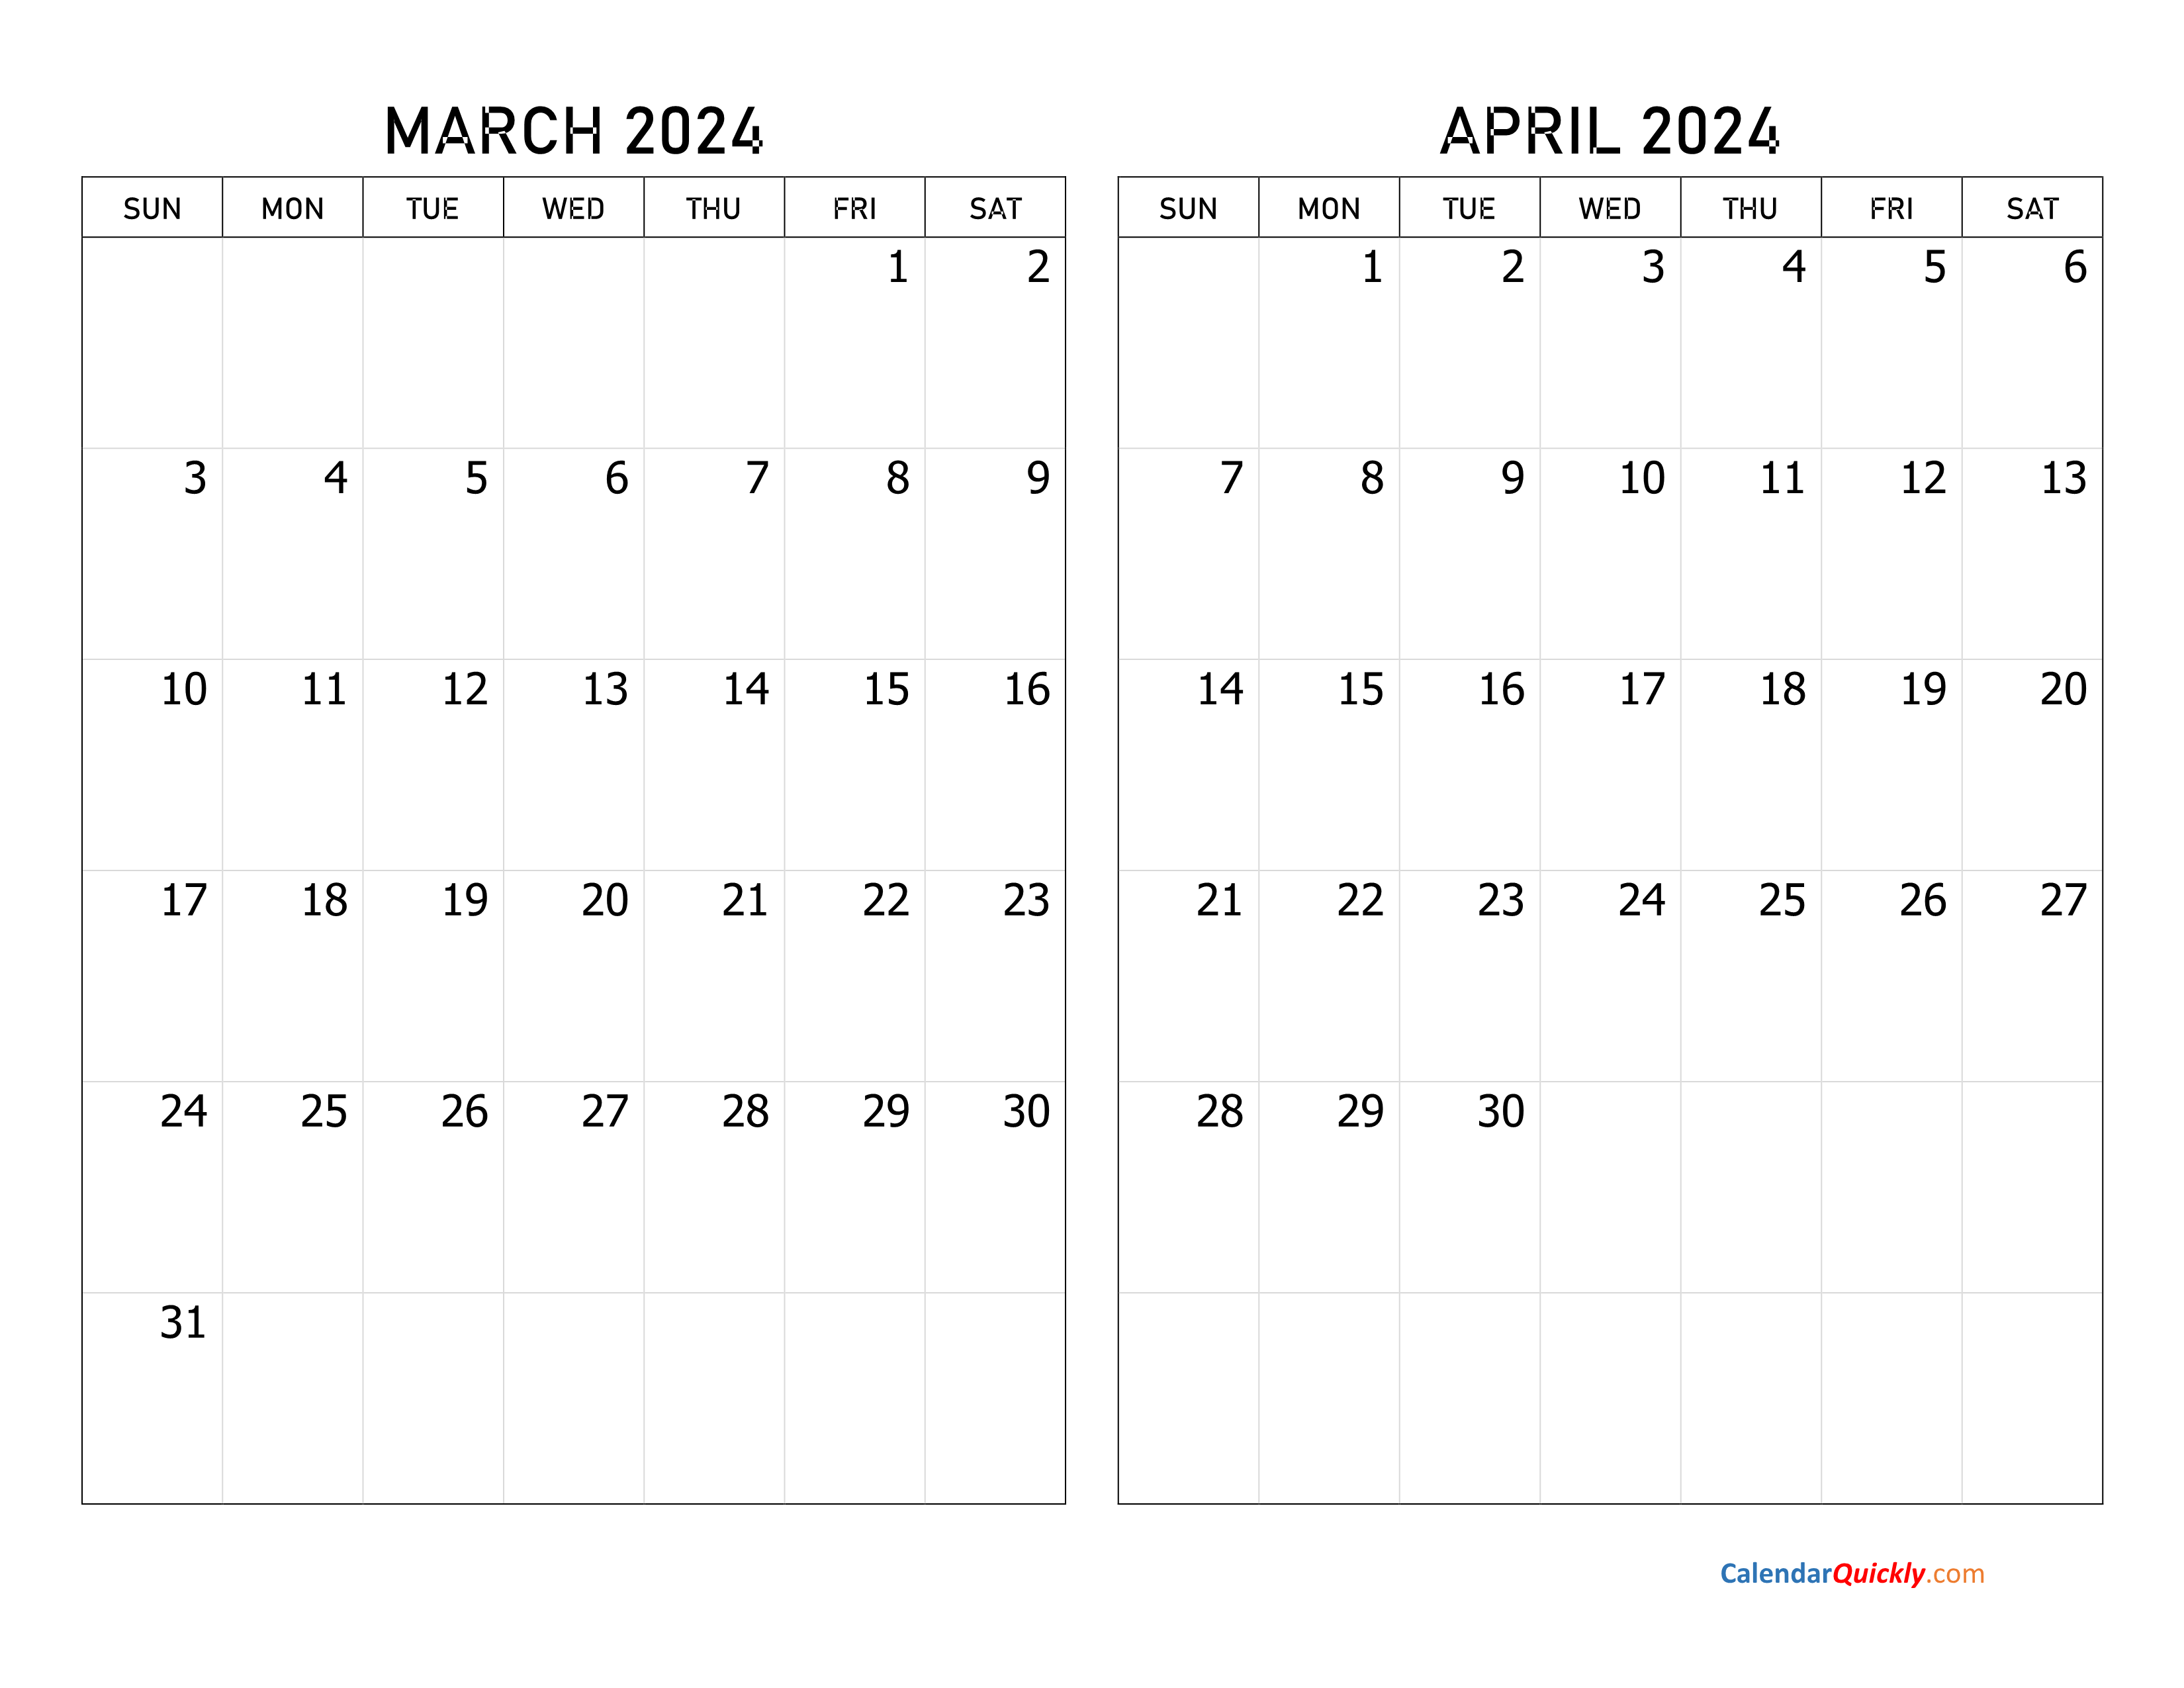 March And April 2024 Calendar | Calendar Quickly with regard to 2024 Calendar March April May June